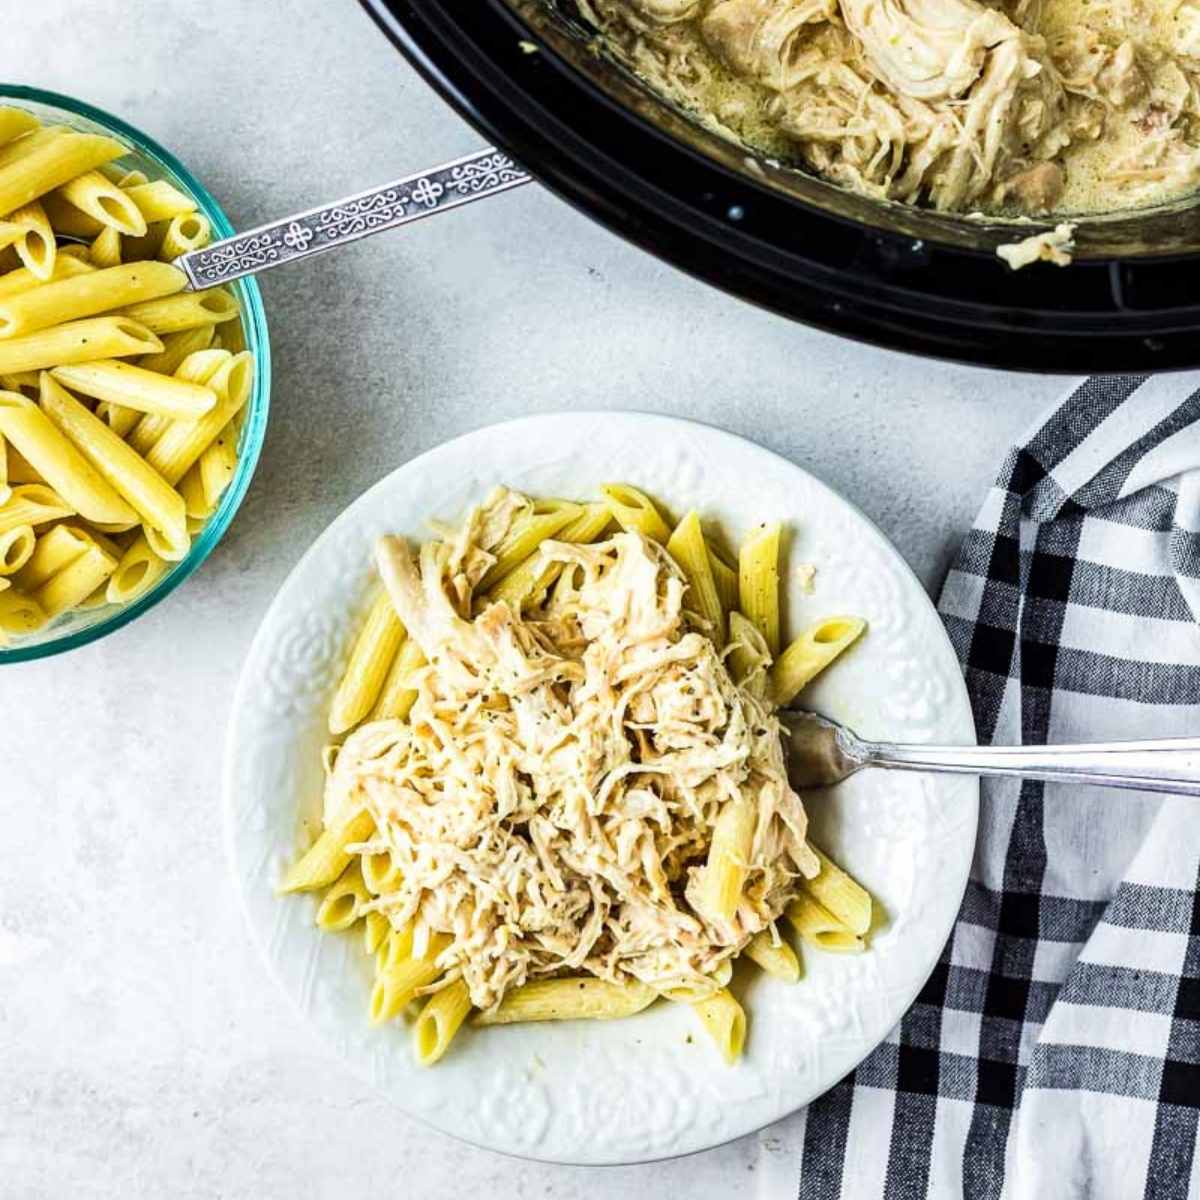 shredded crockpot olive garden chicken on top of noodles on a white plate